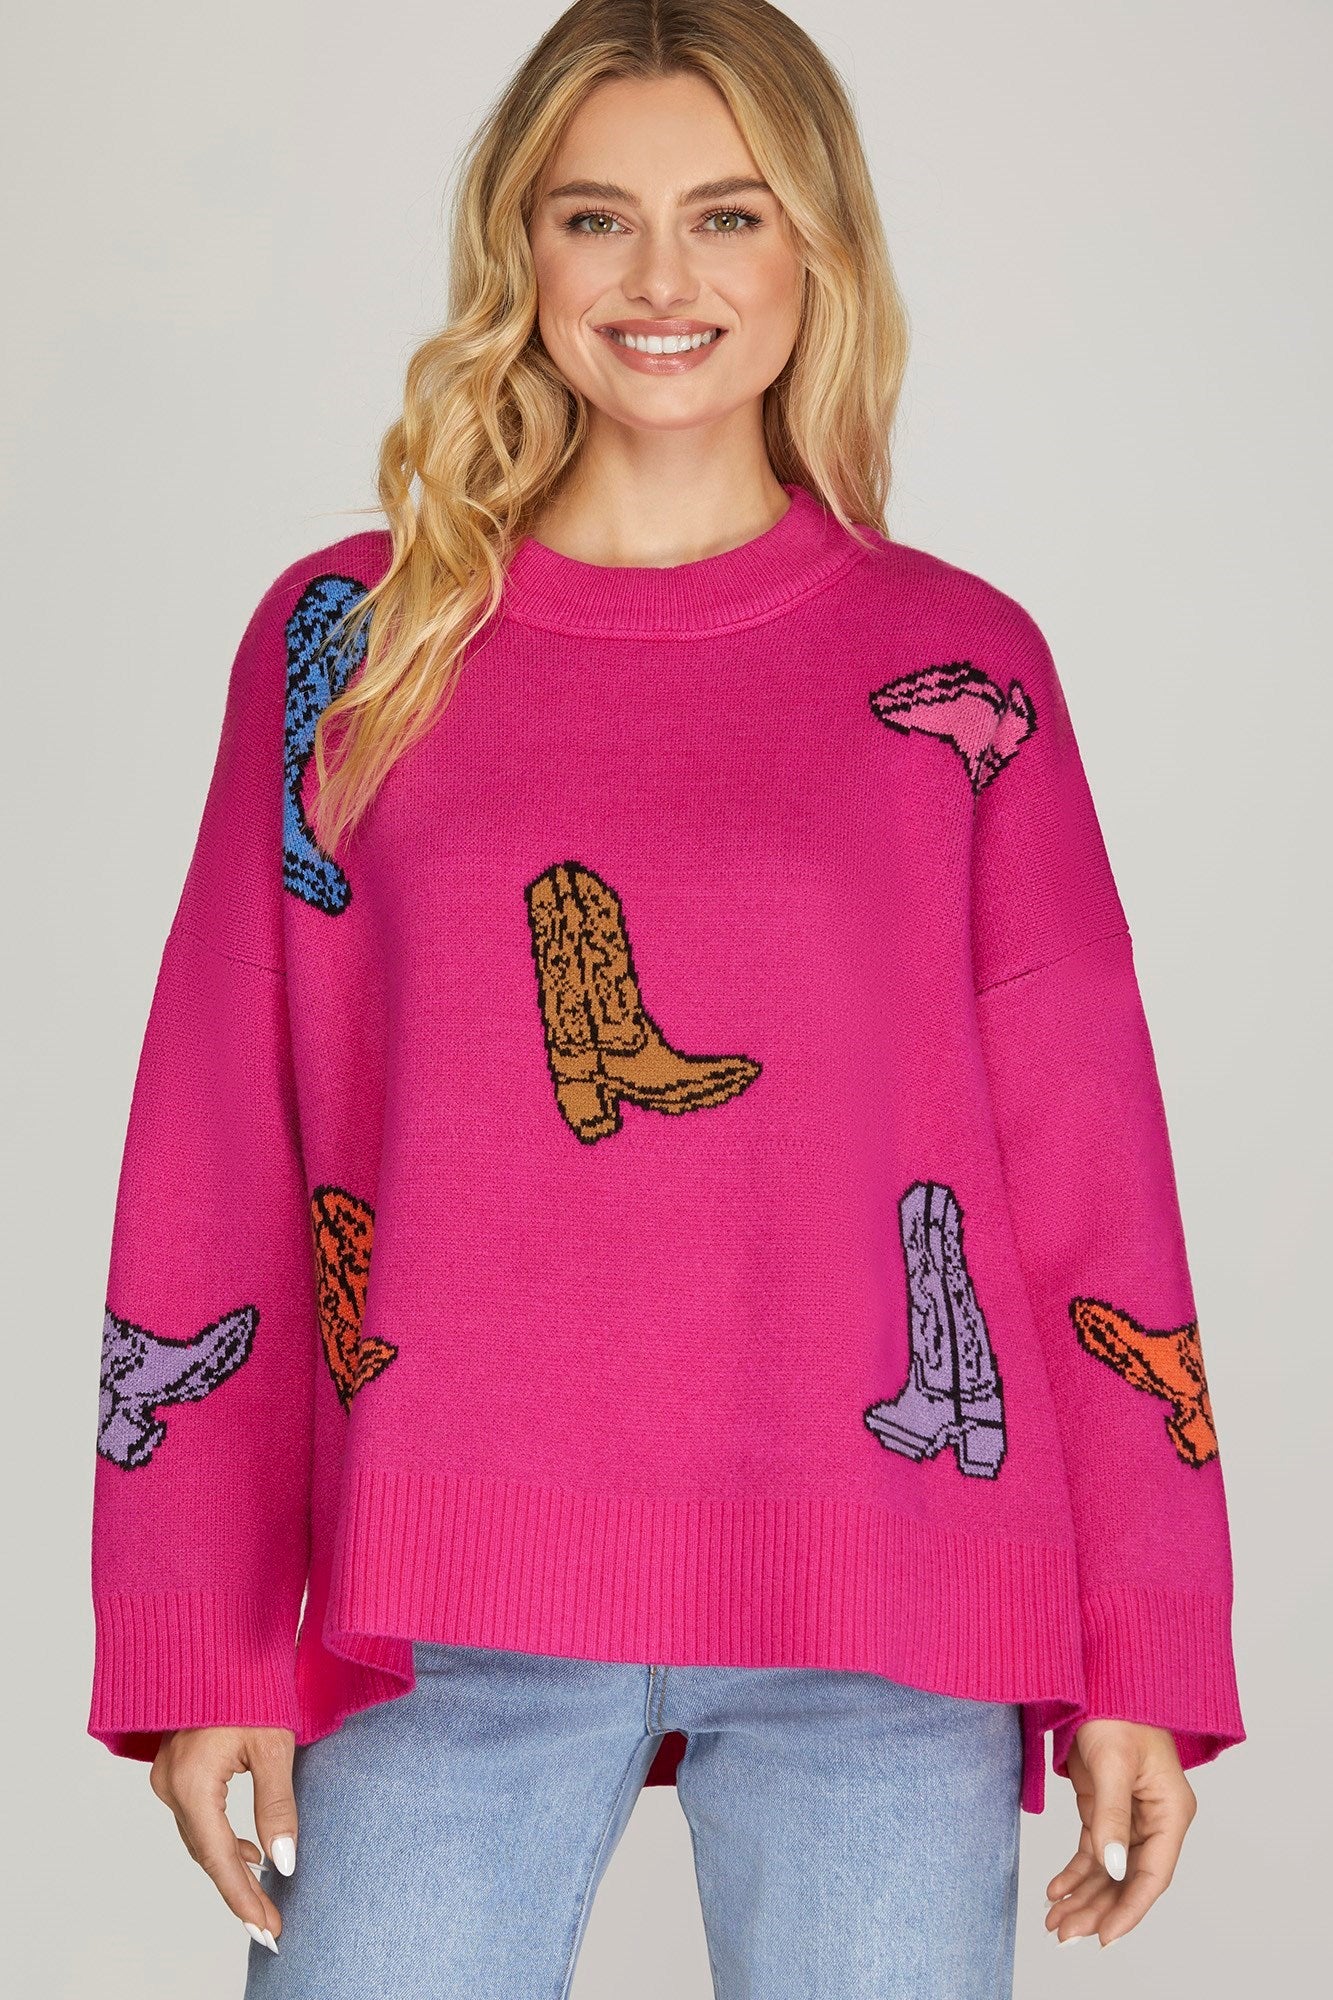 Hot Pink Boot Sweater